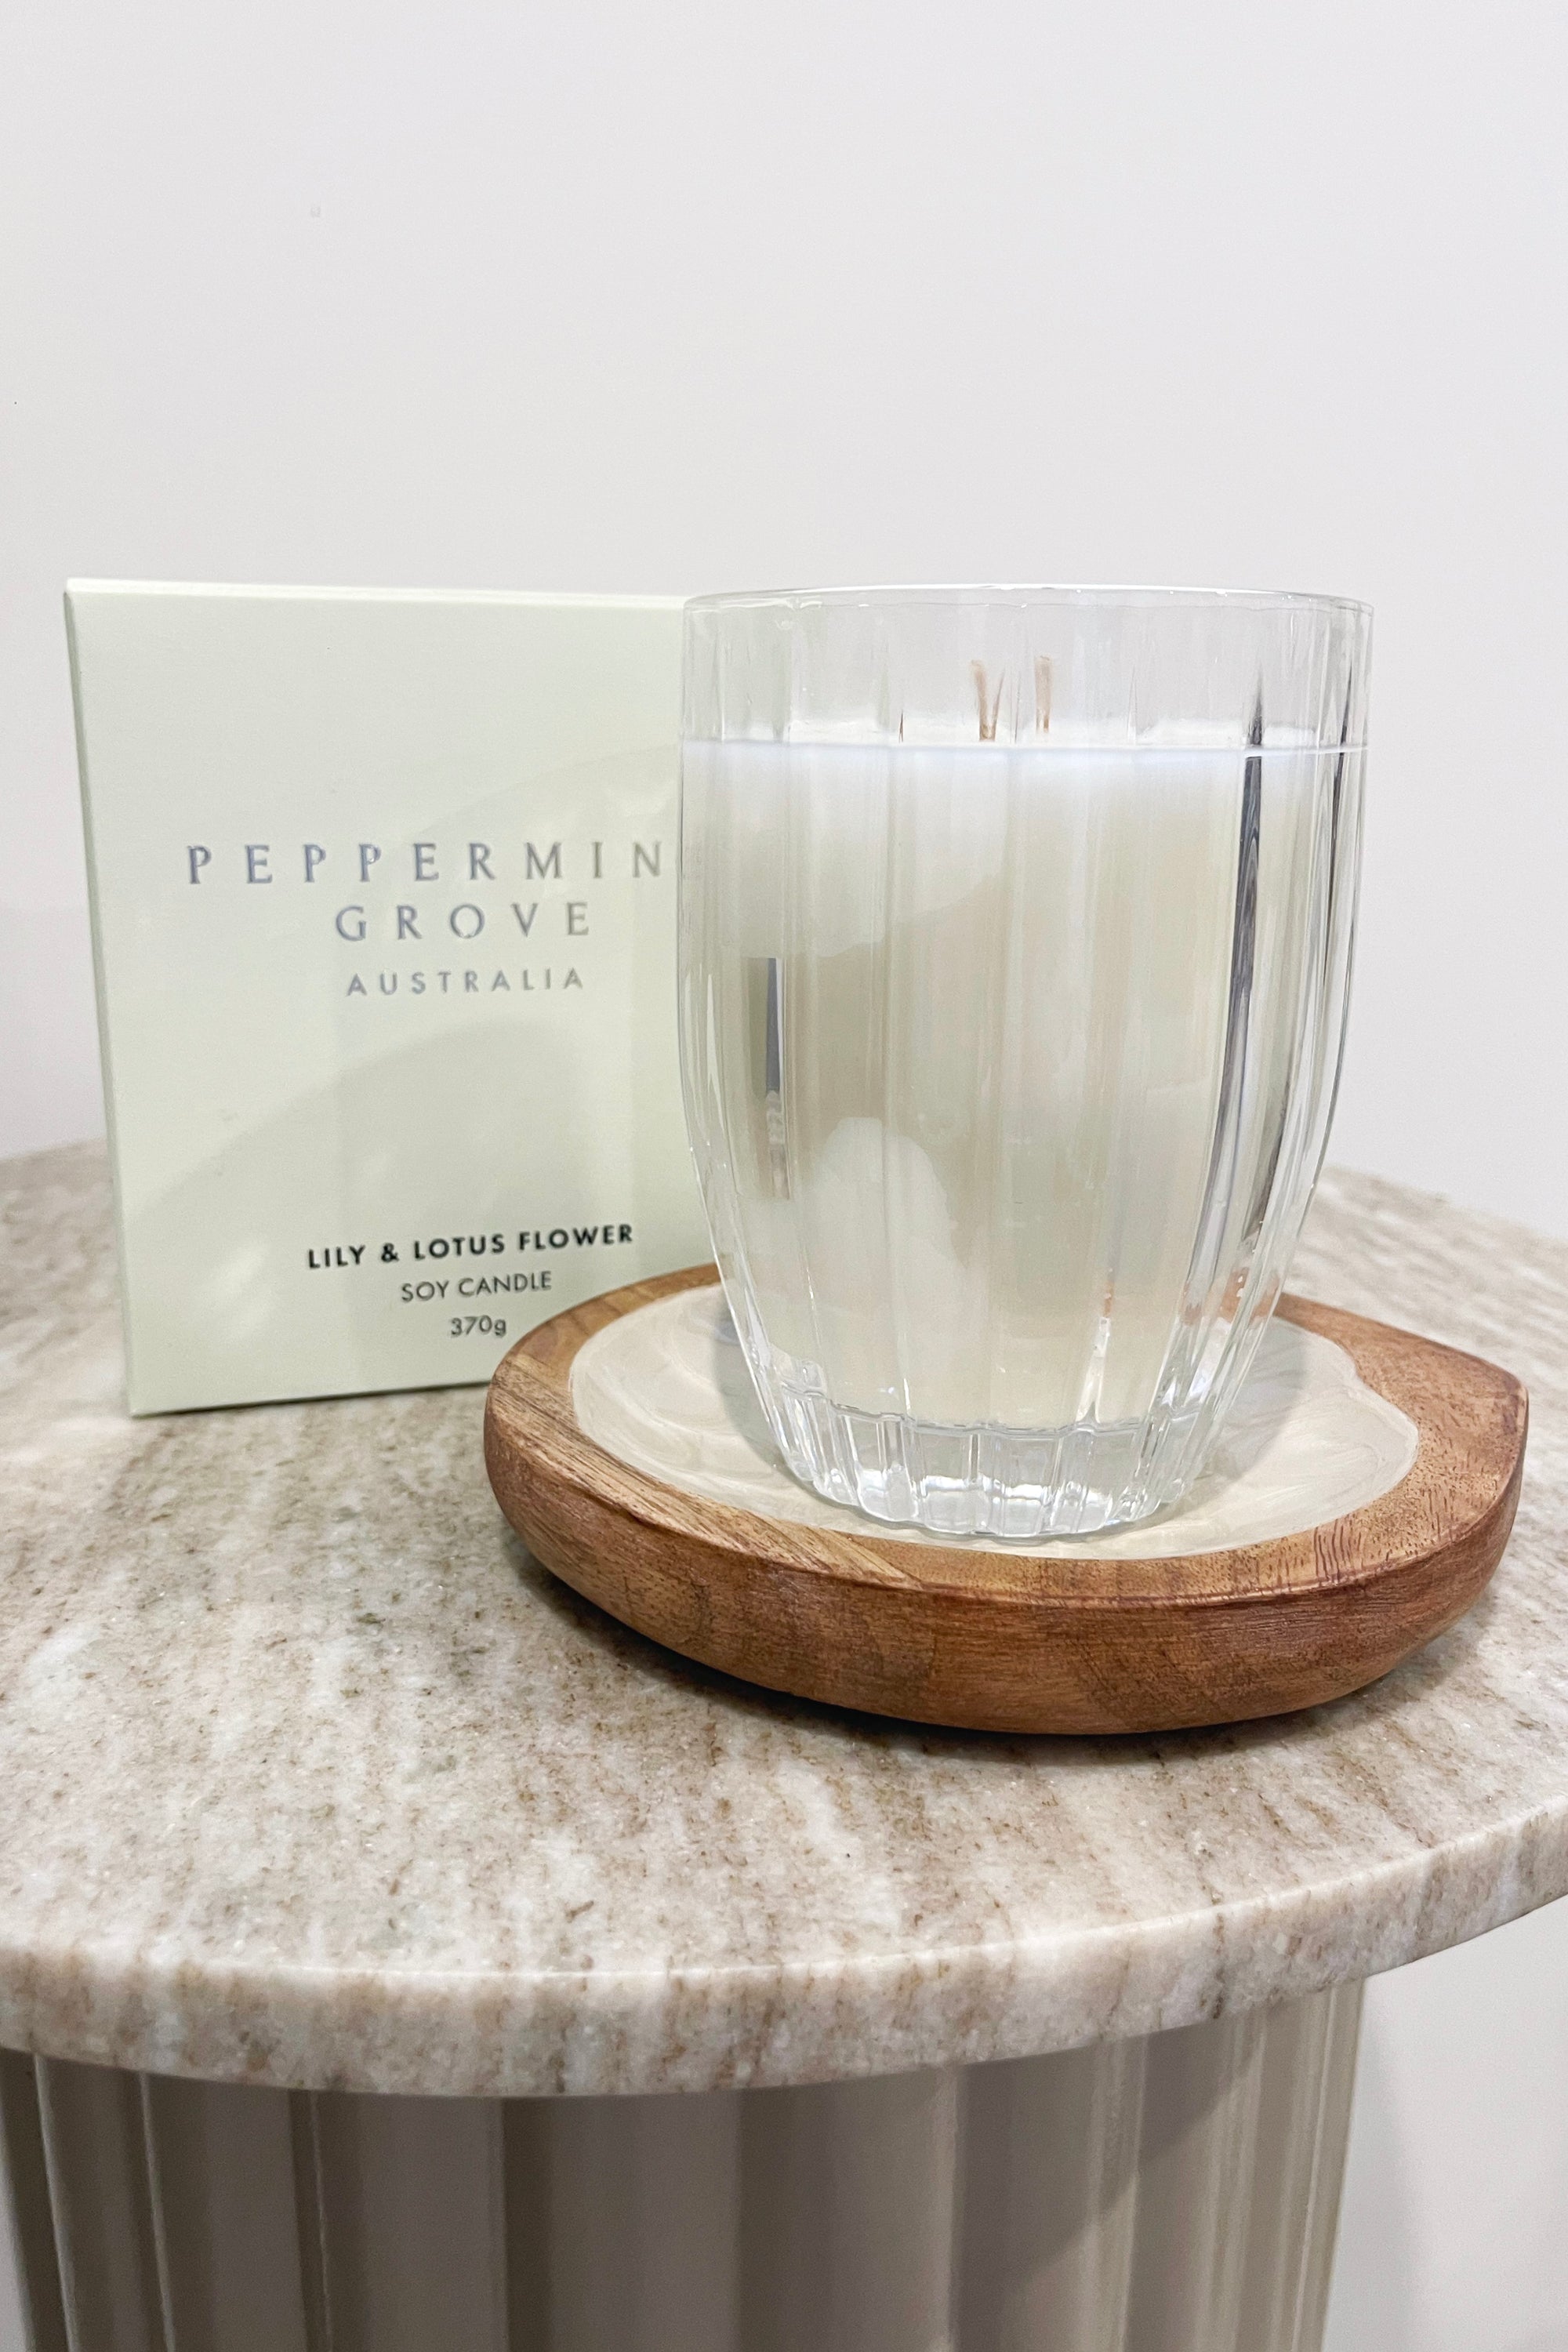 Peppermint Grove Soy Candle | Lily & Lotus Flower